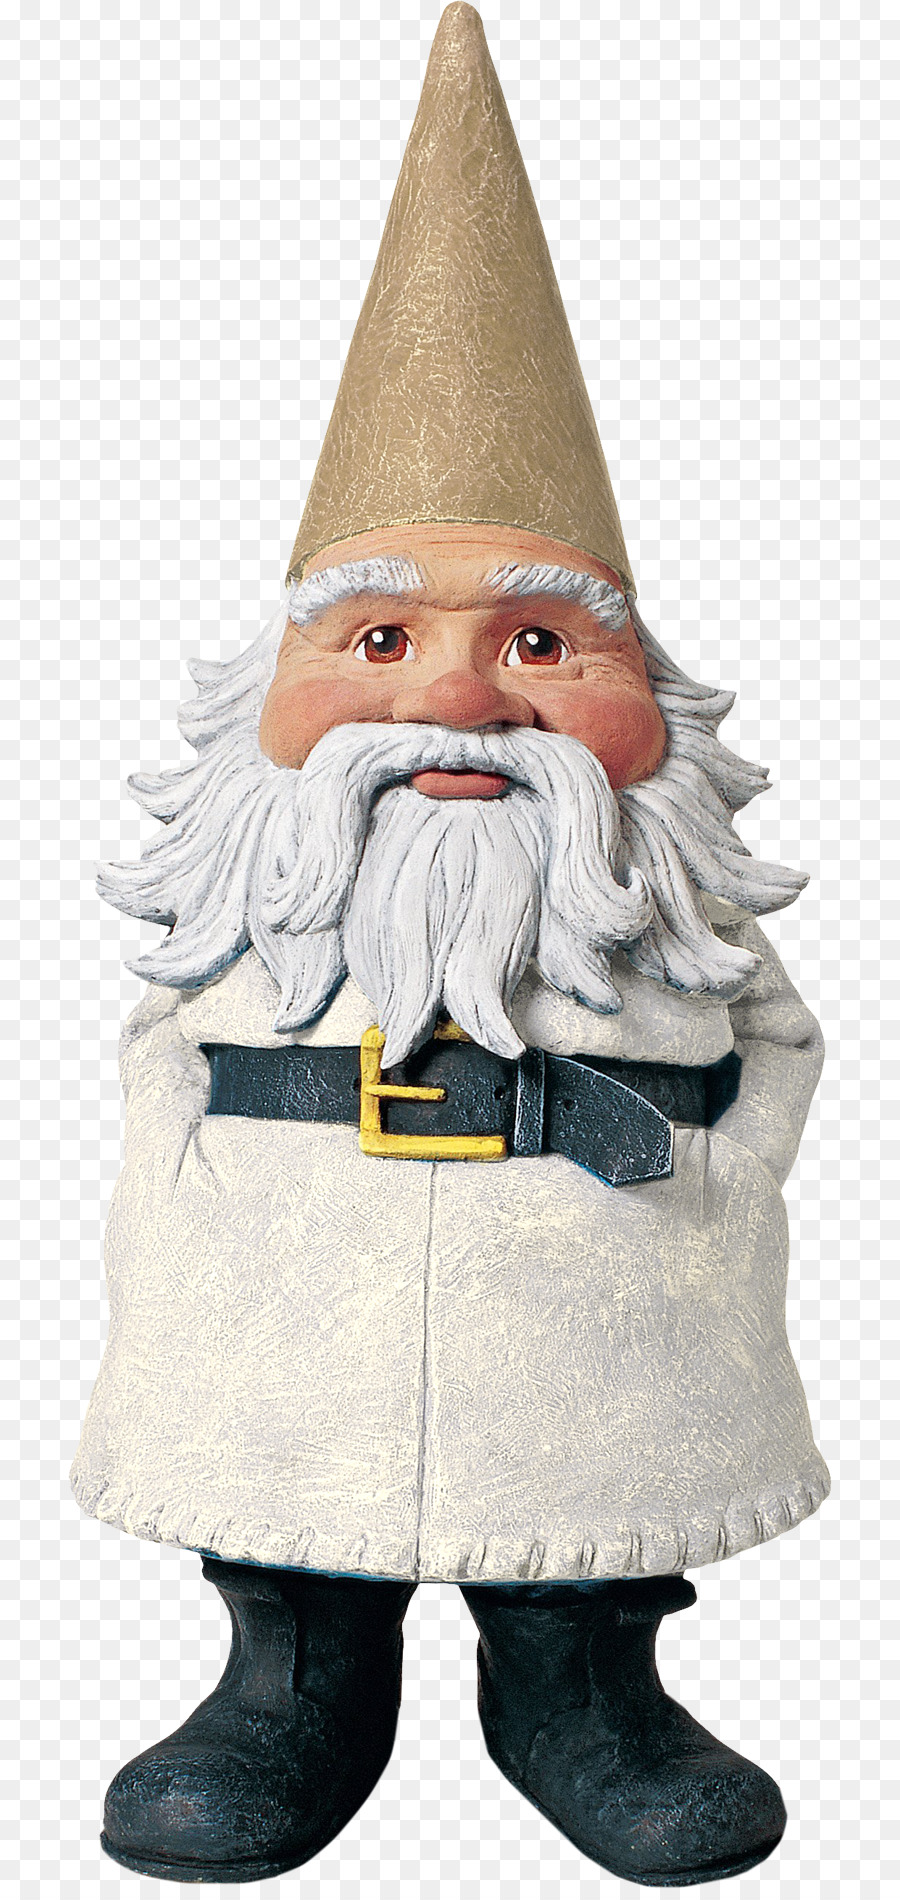 Santa Claus Garden gnome Where Is My Gnome? Travelocity - Kind cute Santa Claus png download - 764*1900 - Free Transparent Santa Claus png Download.